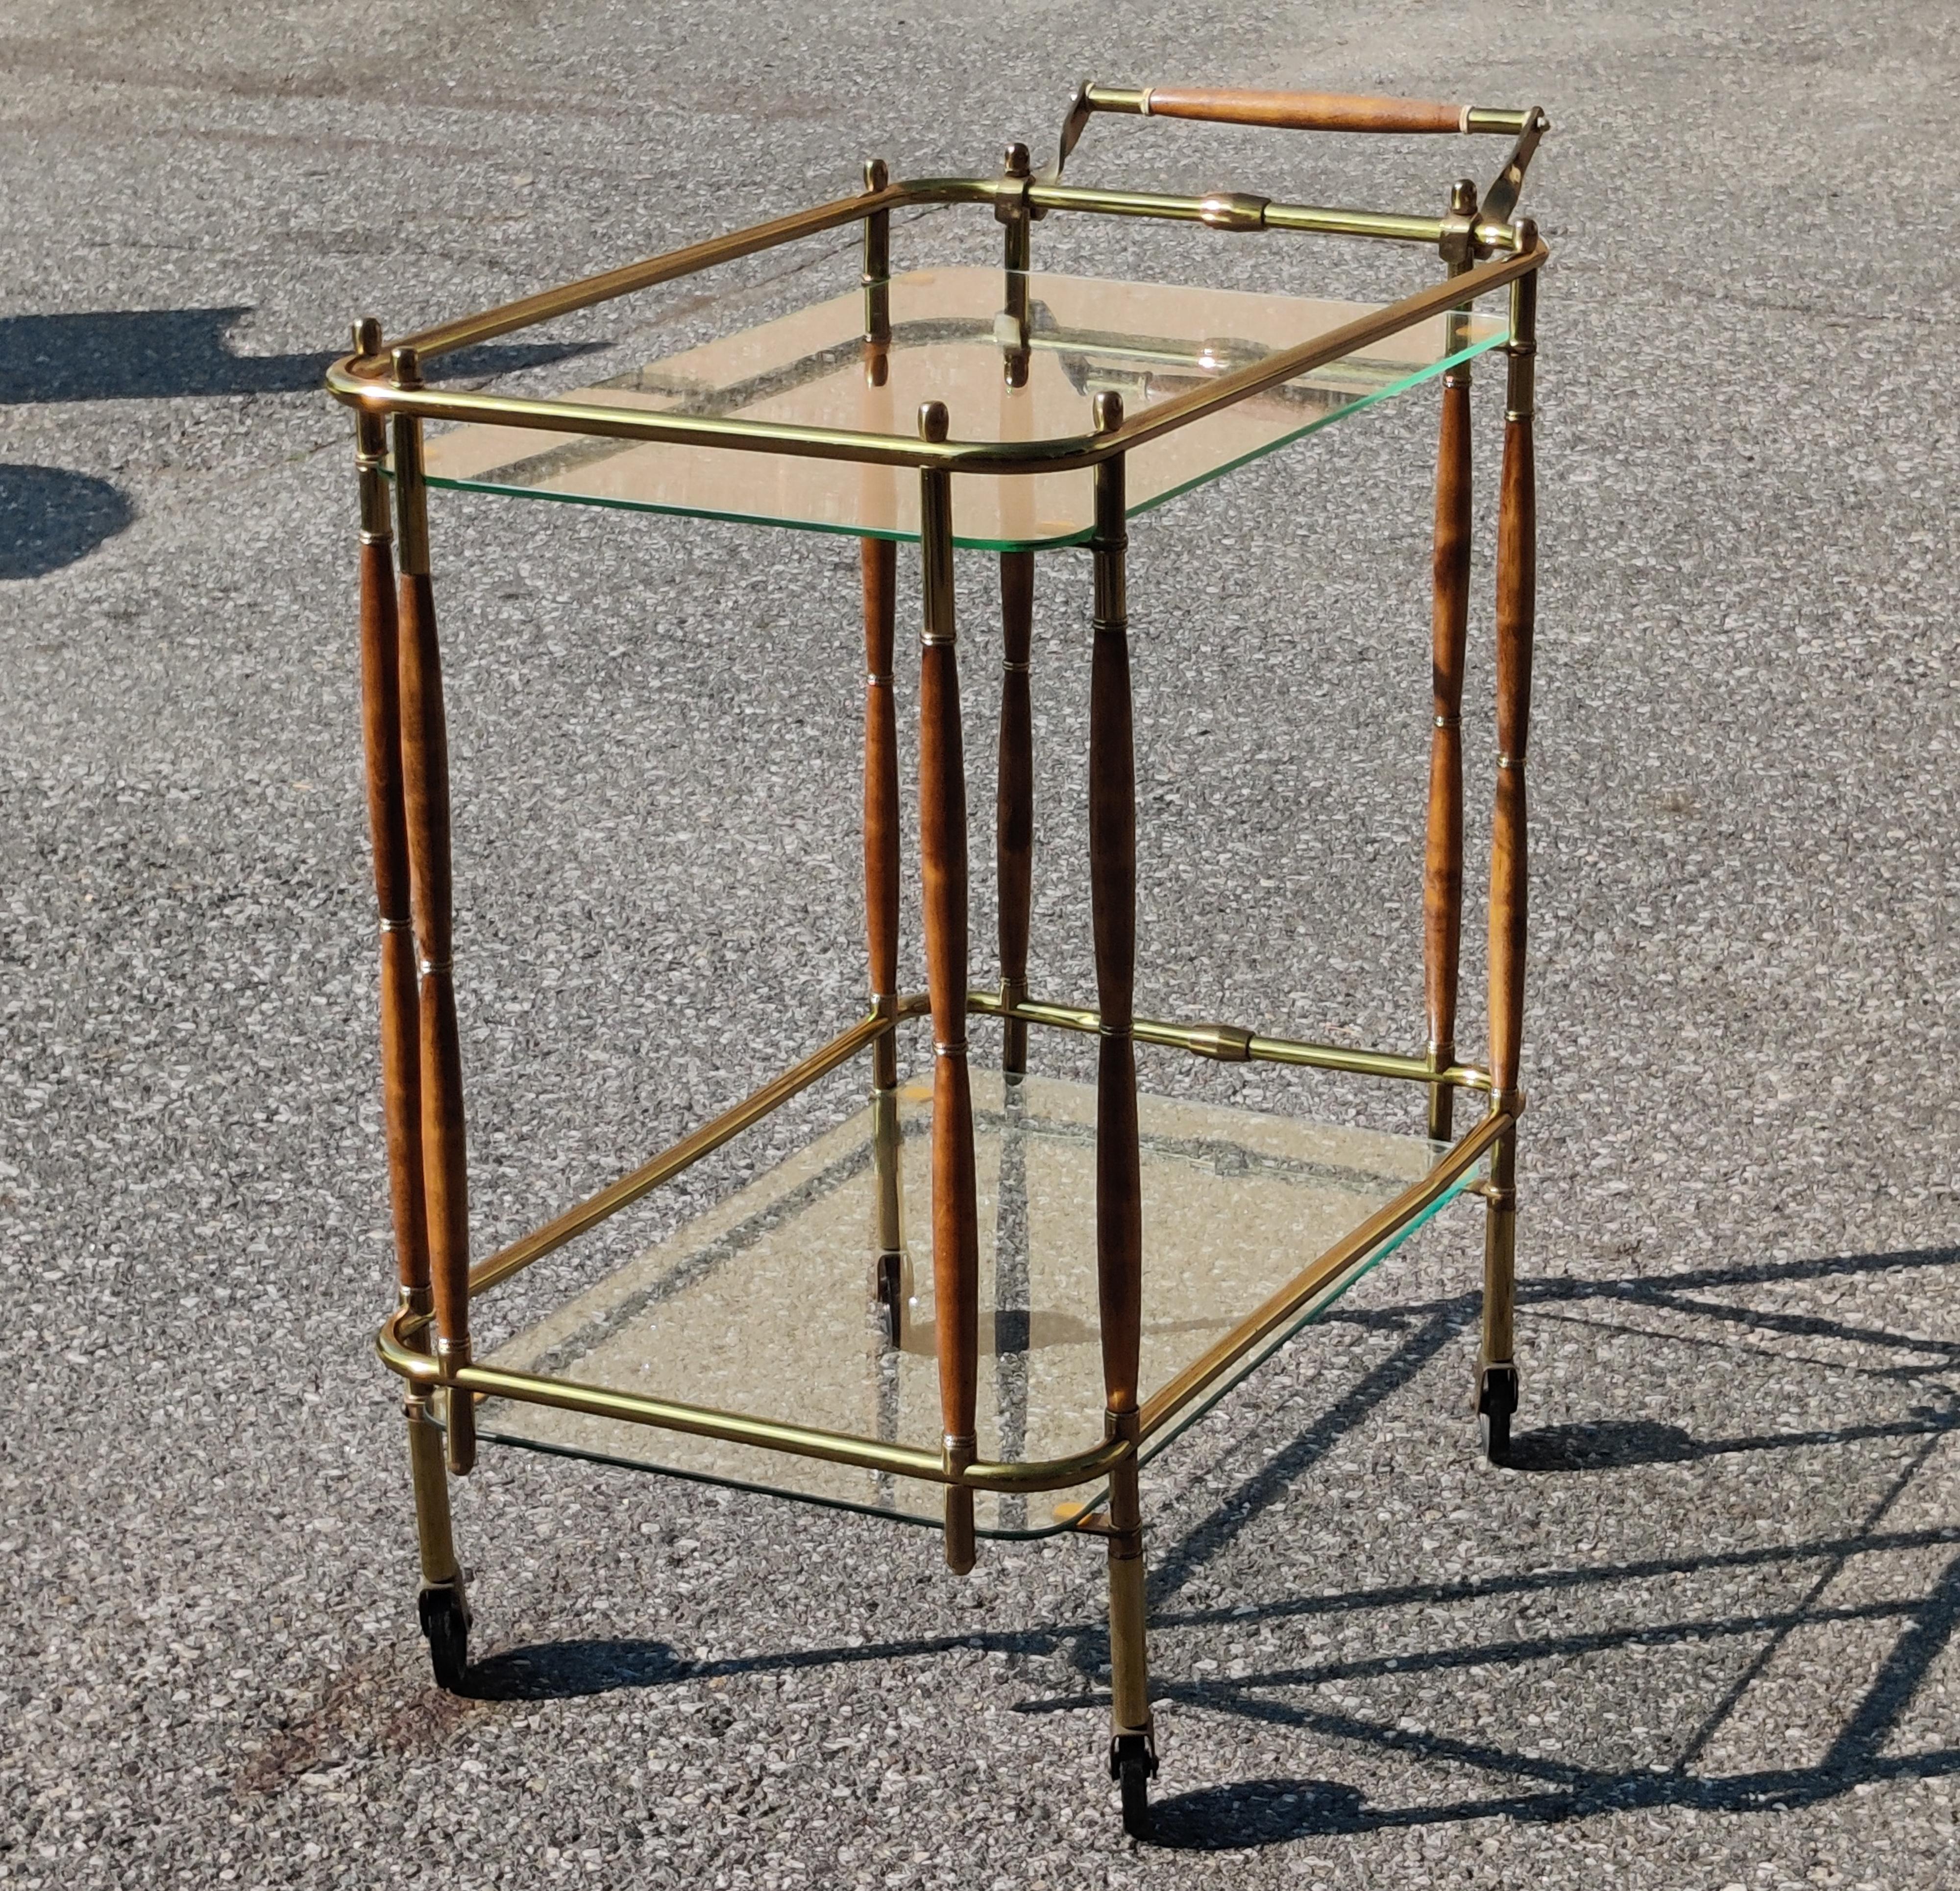 A very elegant Italian style or Hollywood Regency style tubulaur brass bar cart with turned walnut elements. This stylish bar cart is also very practical, having the orignal casters and a handle for ease of use. Notice the gallery around the lower